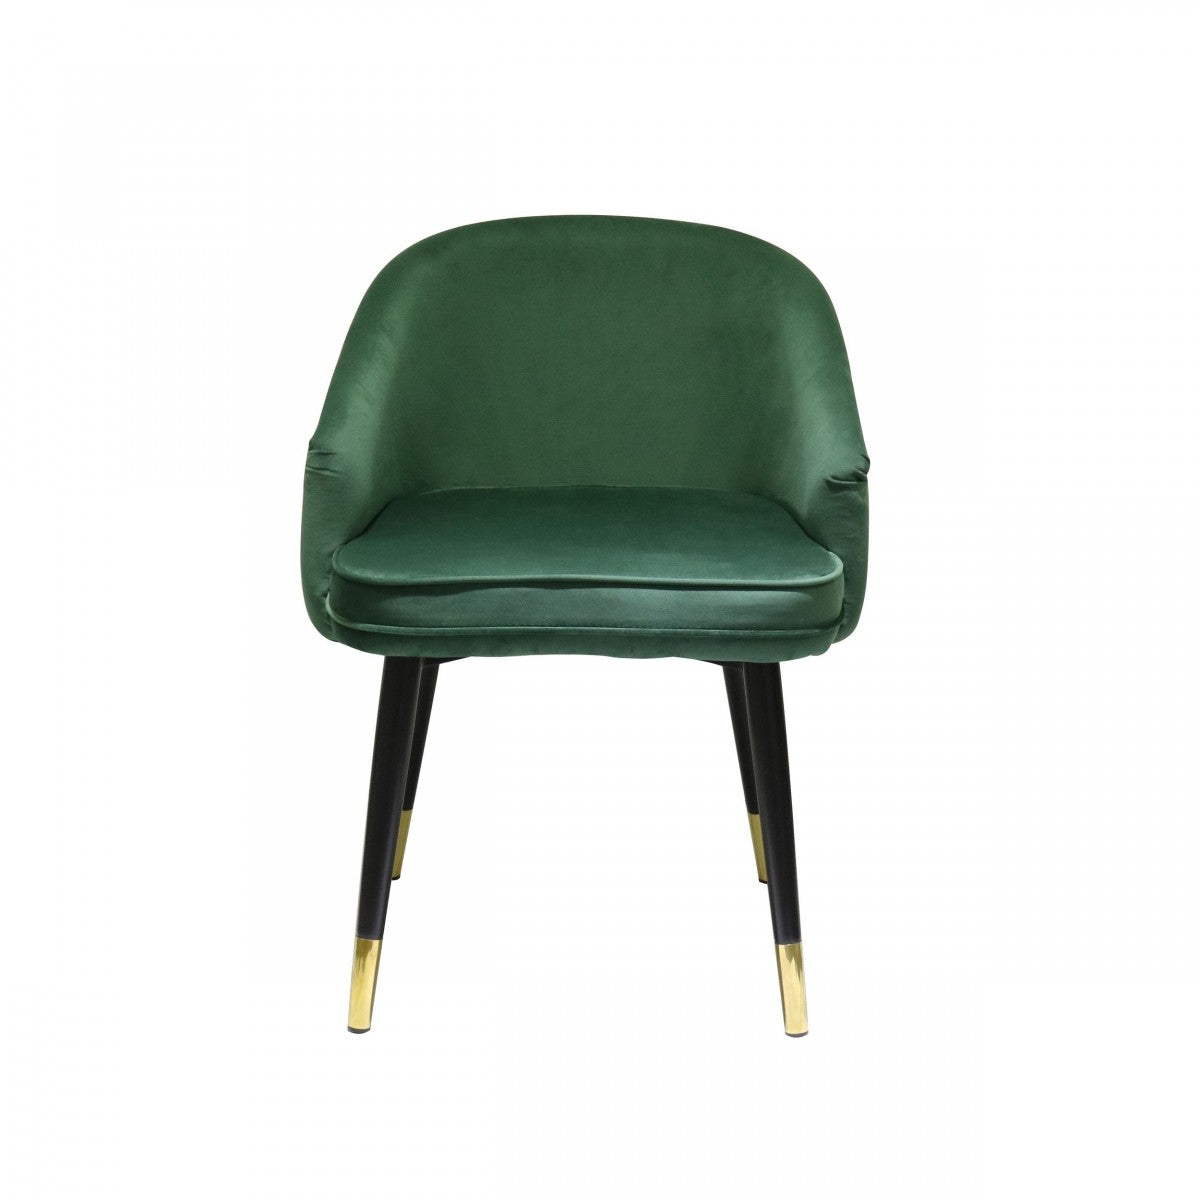 Tosca Contemporary Green & Black/Gold Dining Chairs (Set of 2)